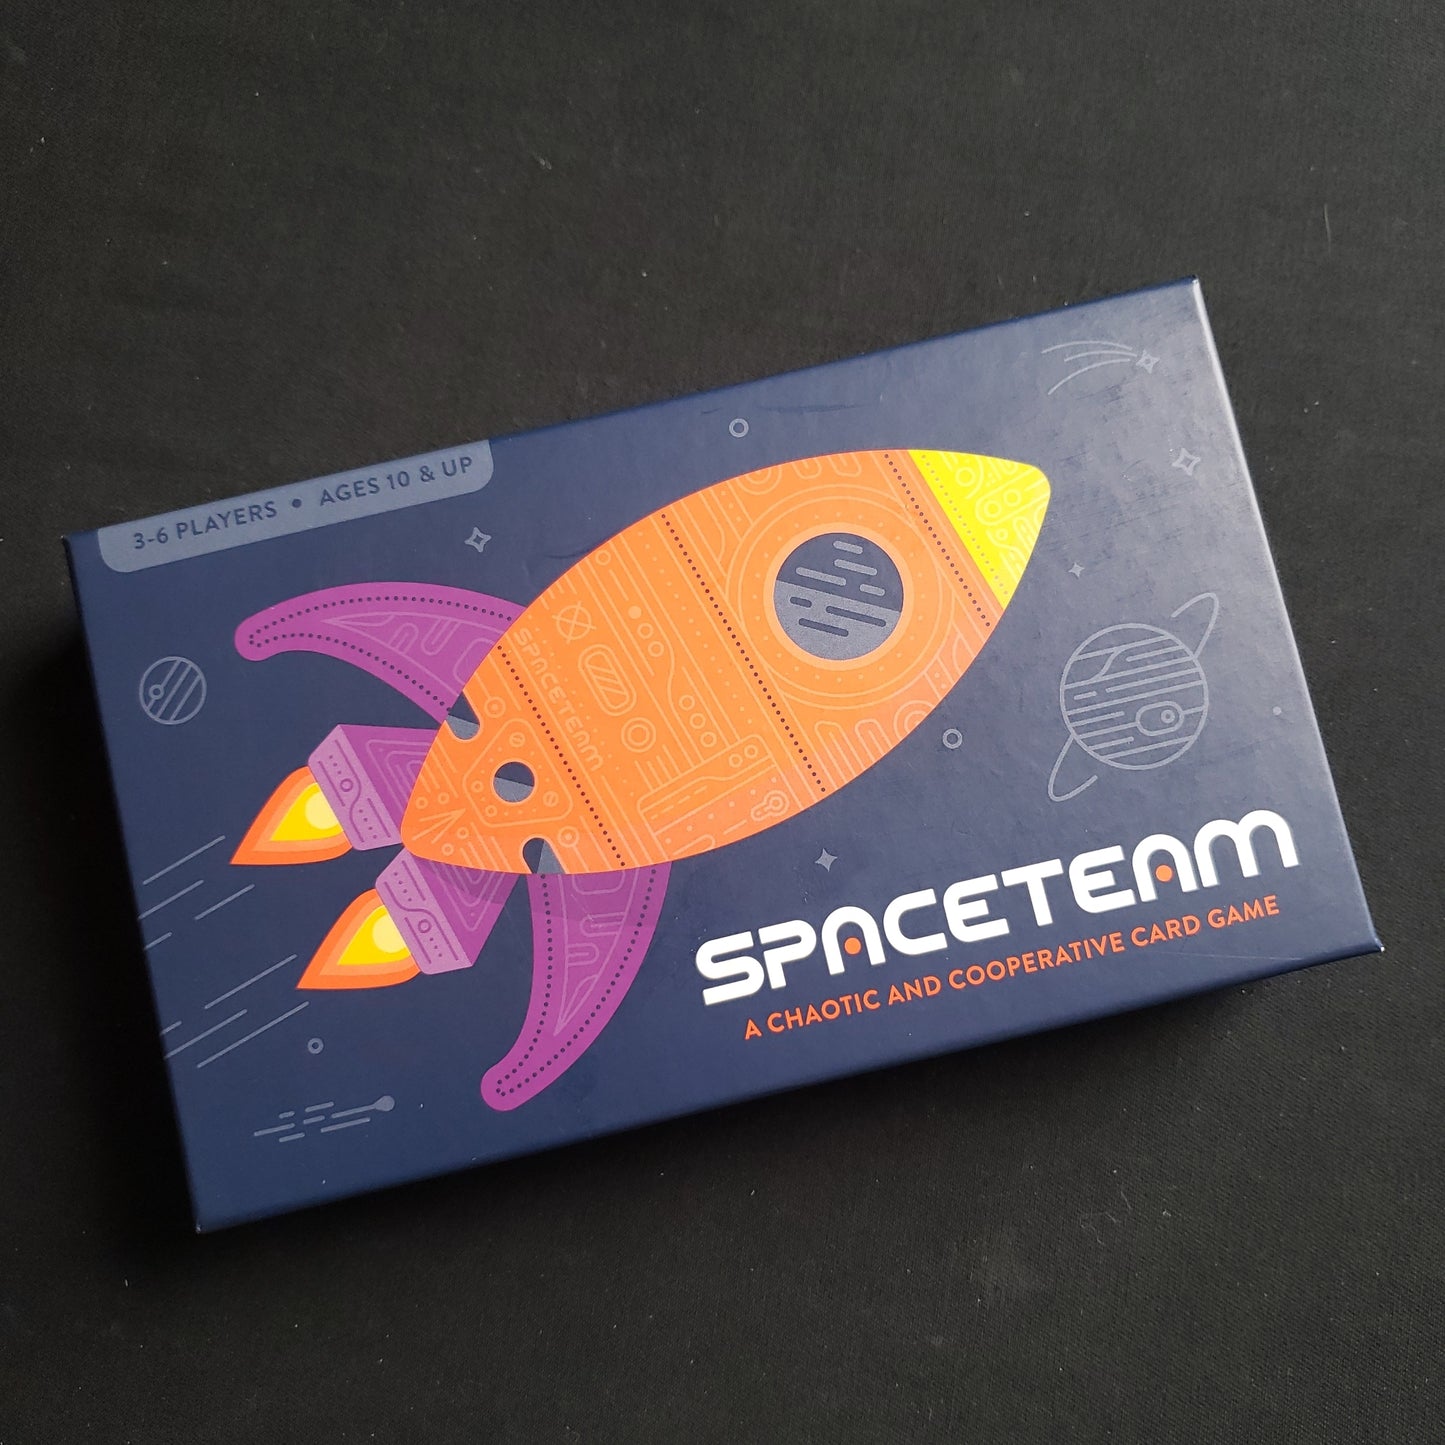 Image shows the front cover of the box of the Spaceteam card game